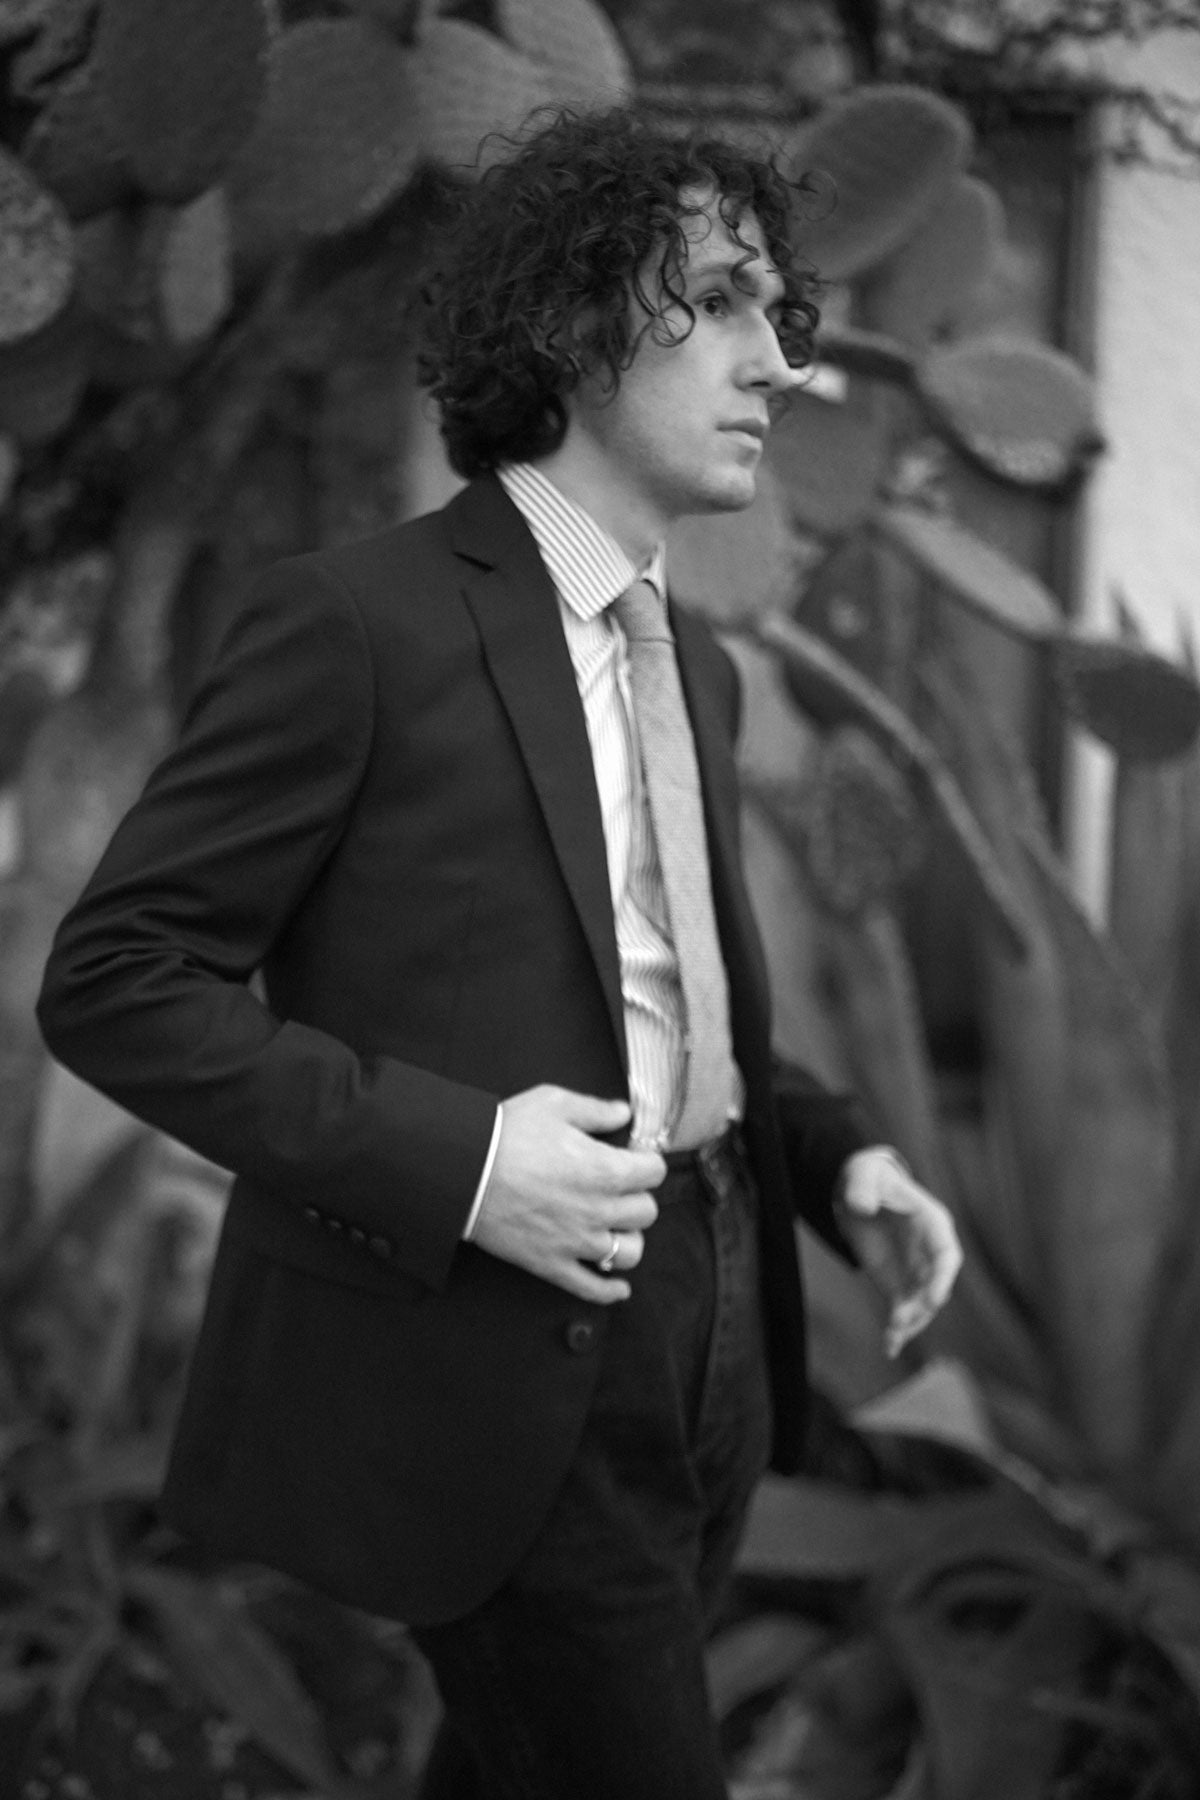 Black and white image of model wearing dark suit, striped dress shirt, and tie.